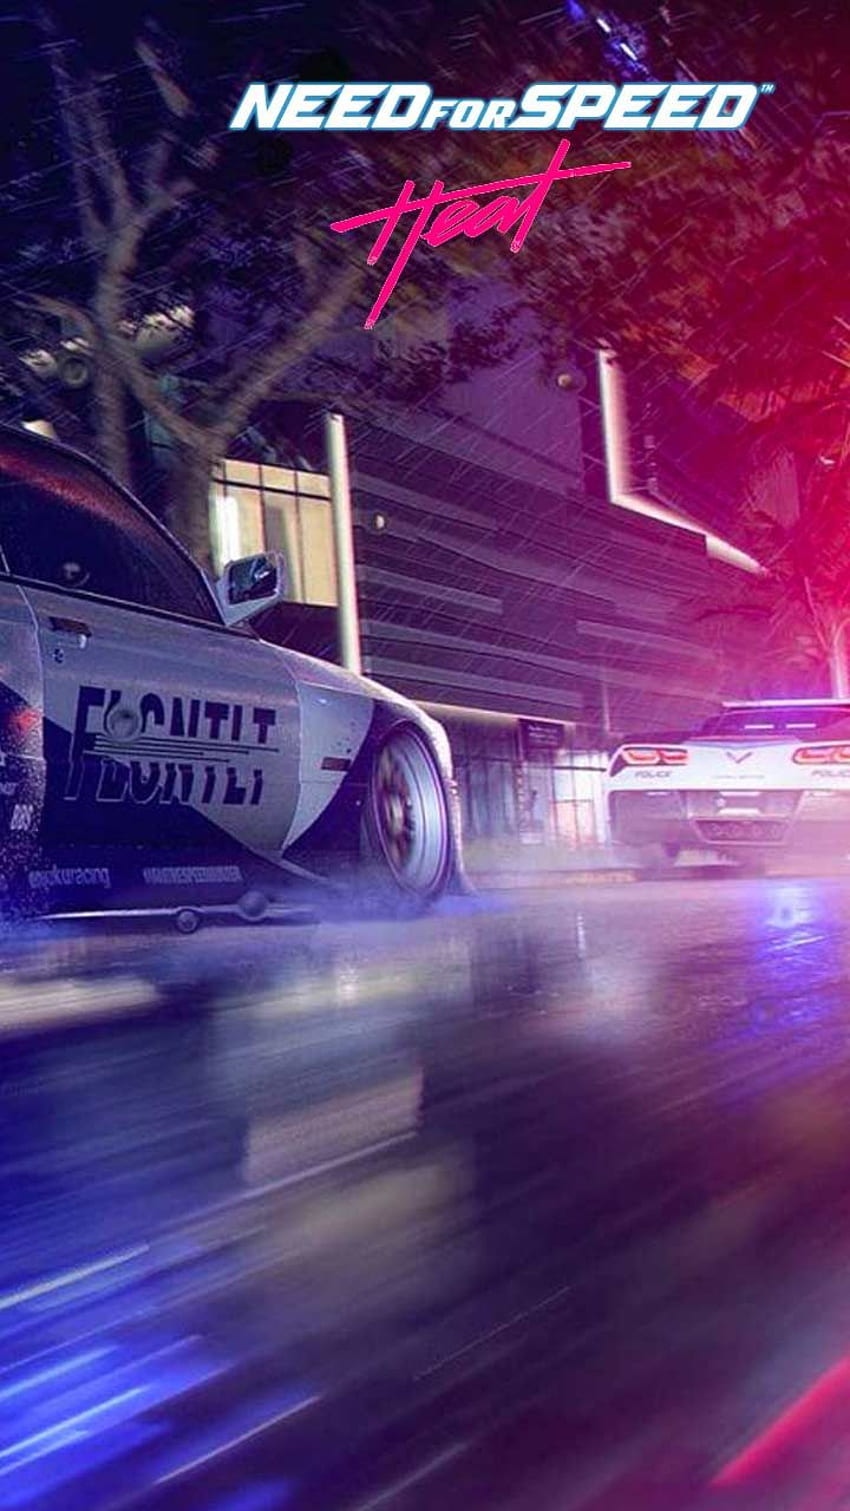 Need for speed heat phone background Cars Poster art on iPhone android lock screen. Need for speed cars, Need for speed, phone background, Need for Speed Logo HD phone wallpaper